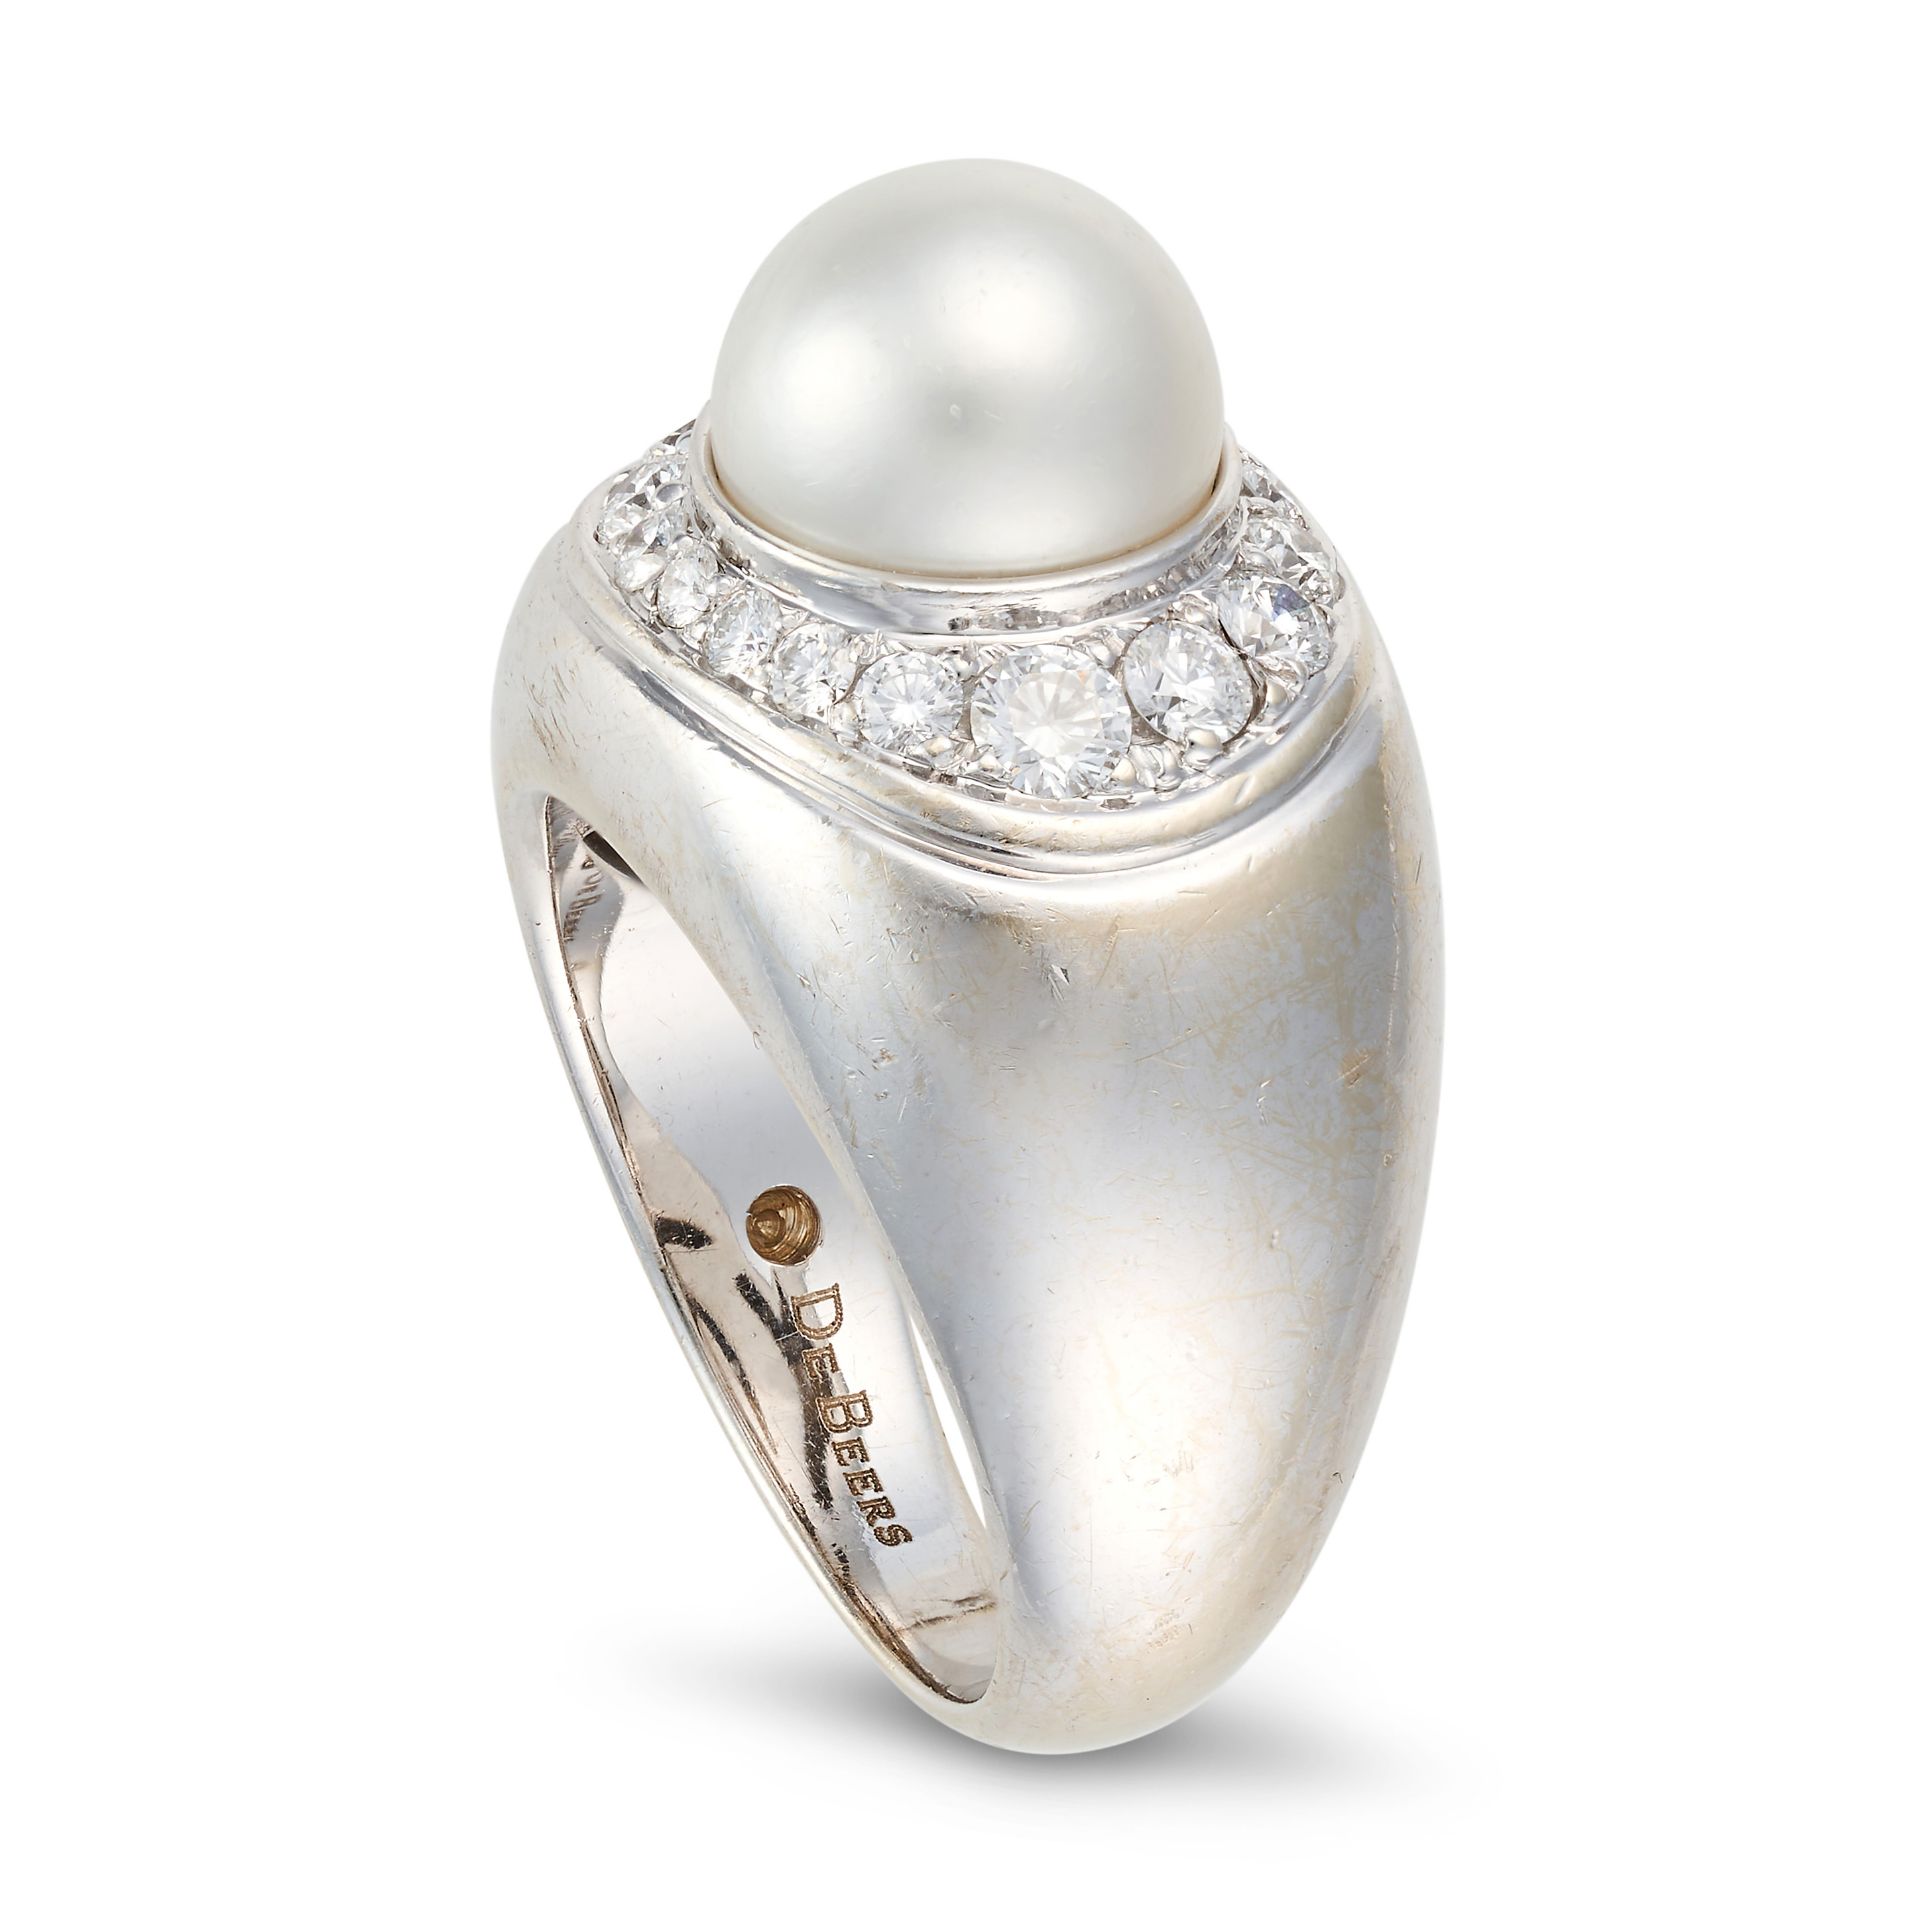 DE BEERS, A PEARL AND DIAMOND RING in 18ct white gold, set with a pearl of 9.4mm in a border of r... - Image 2 of 2